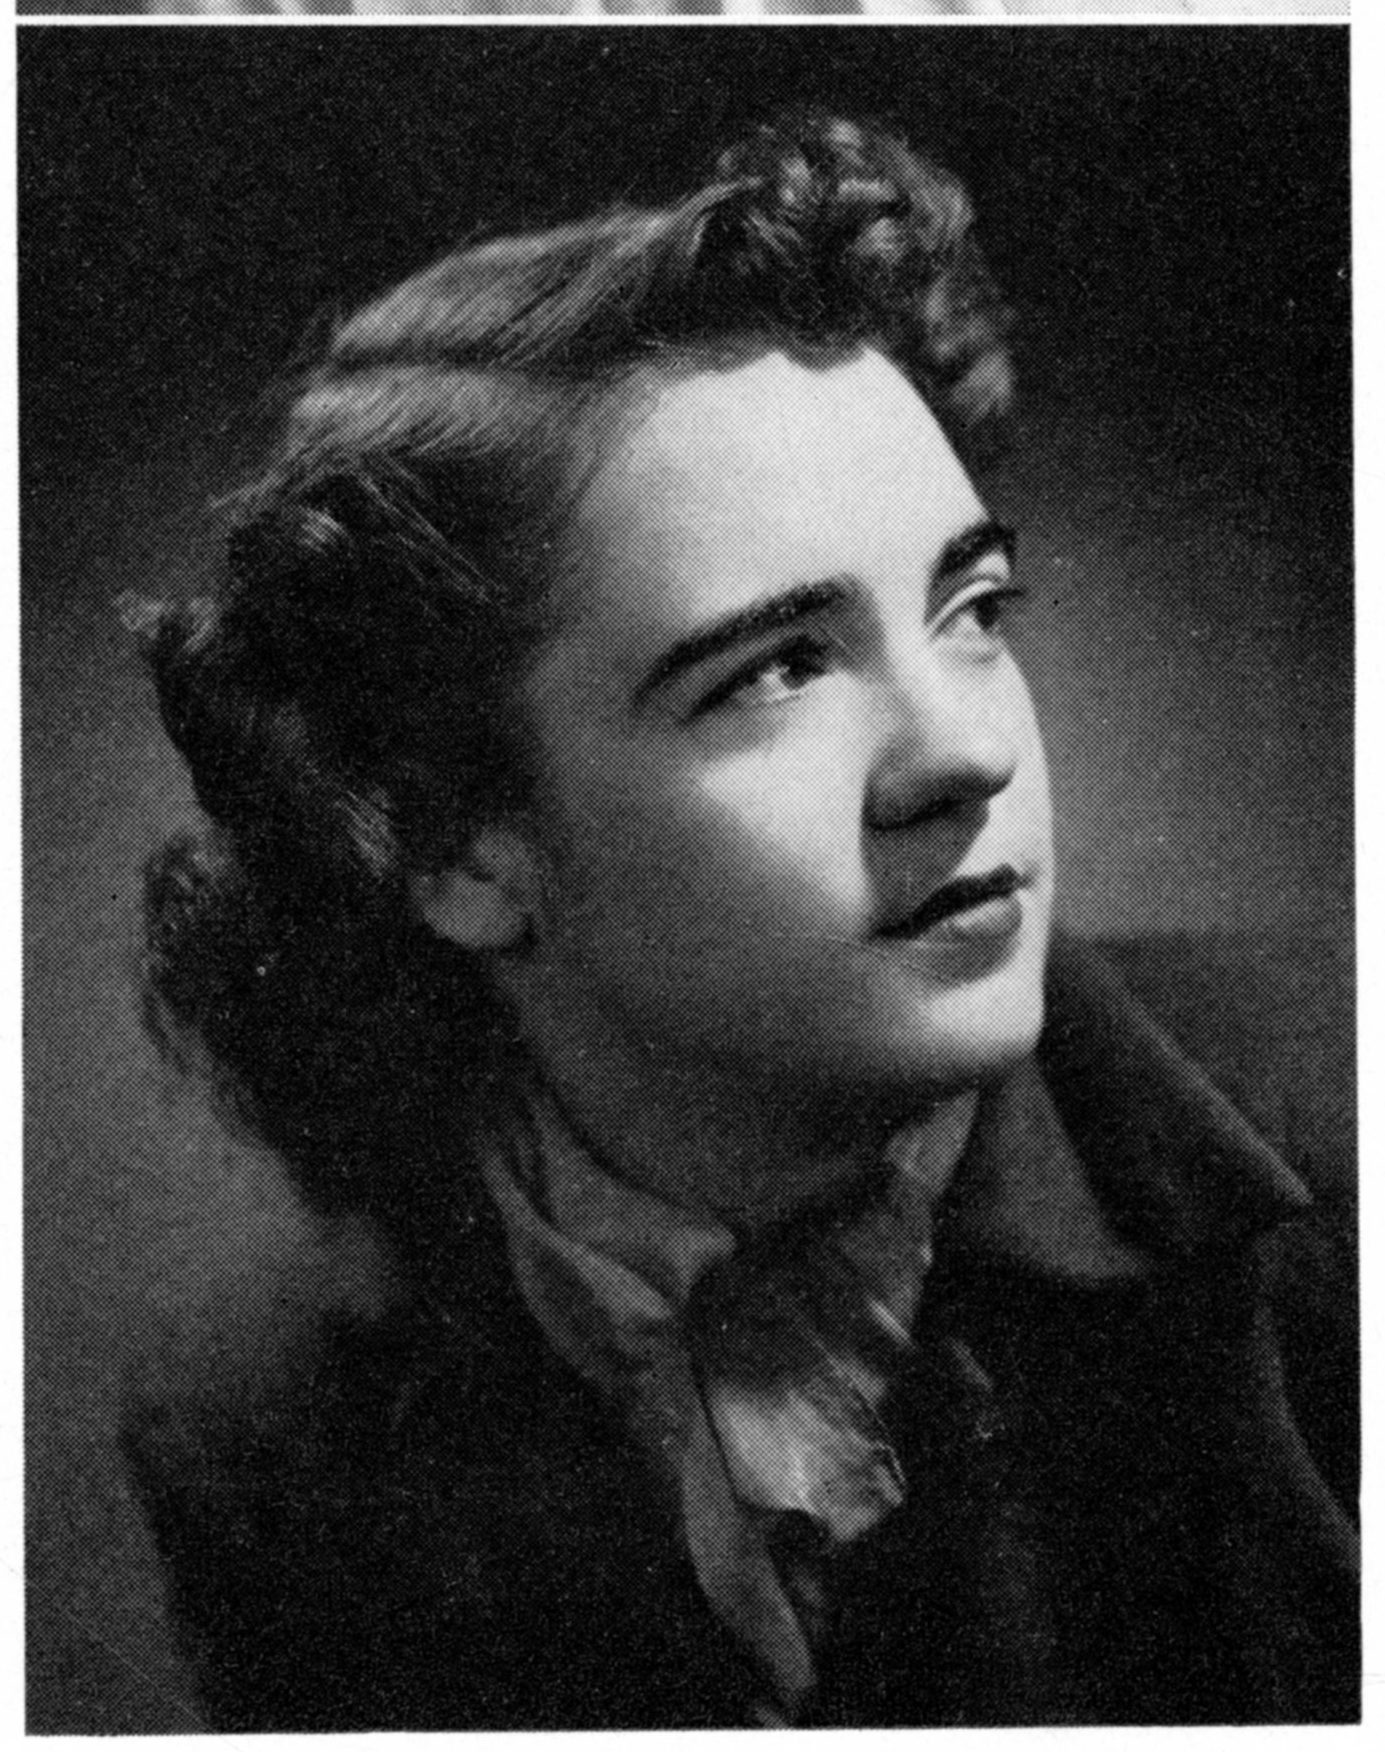 Lois Ann Winter, BM ’48, PC ’49, MAS ’50 (role of Mélisande). Ms. Winter went on to serve on the faculty of Mannes College of Music. Photo from The Score 1948.